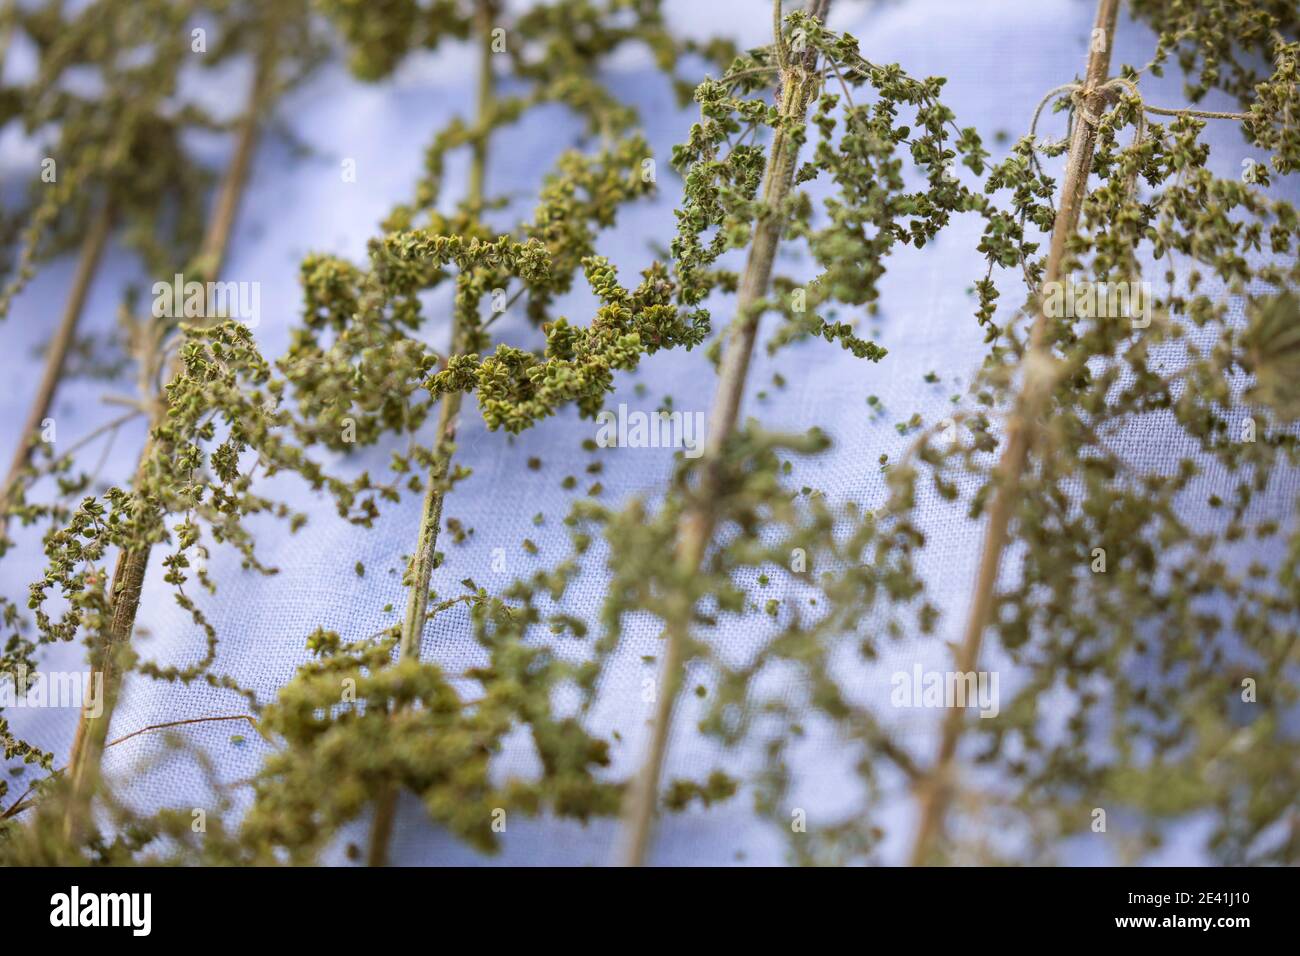 stinging nettle (Urtica dioica), stalks with nettle seeds are dried on a tray, Germany Stock Photo